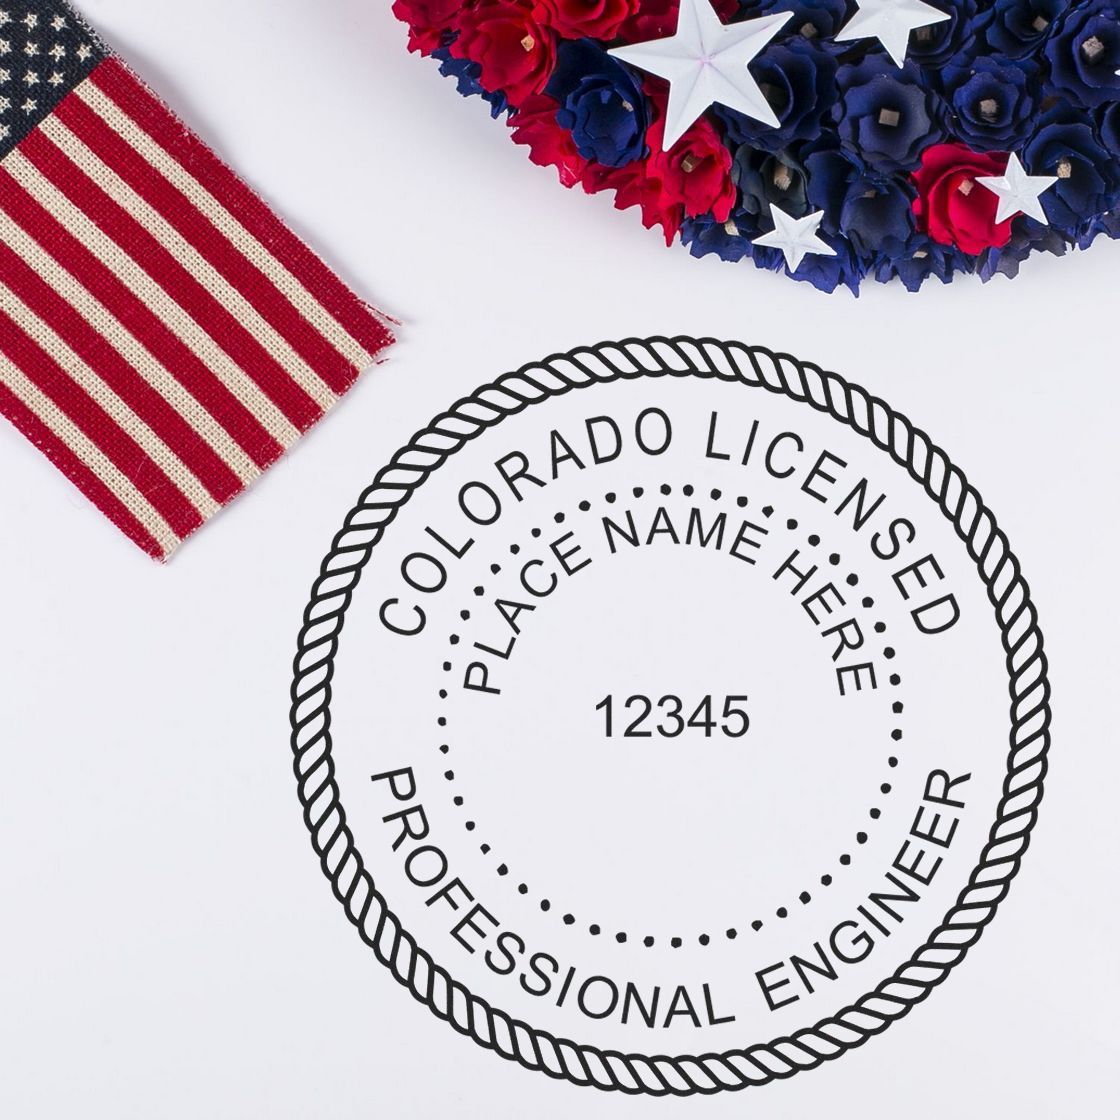 A lifestyle photo showing a stamped image of the Digital Colorado PE Stamp and Electronic Seal for Colorado Engineer on a piece of paper